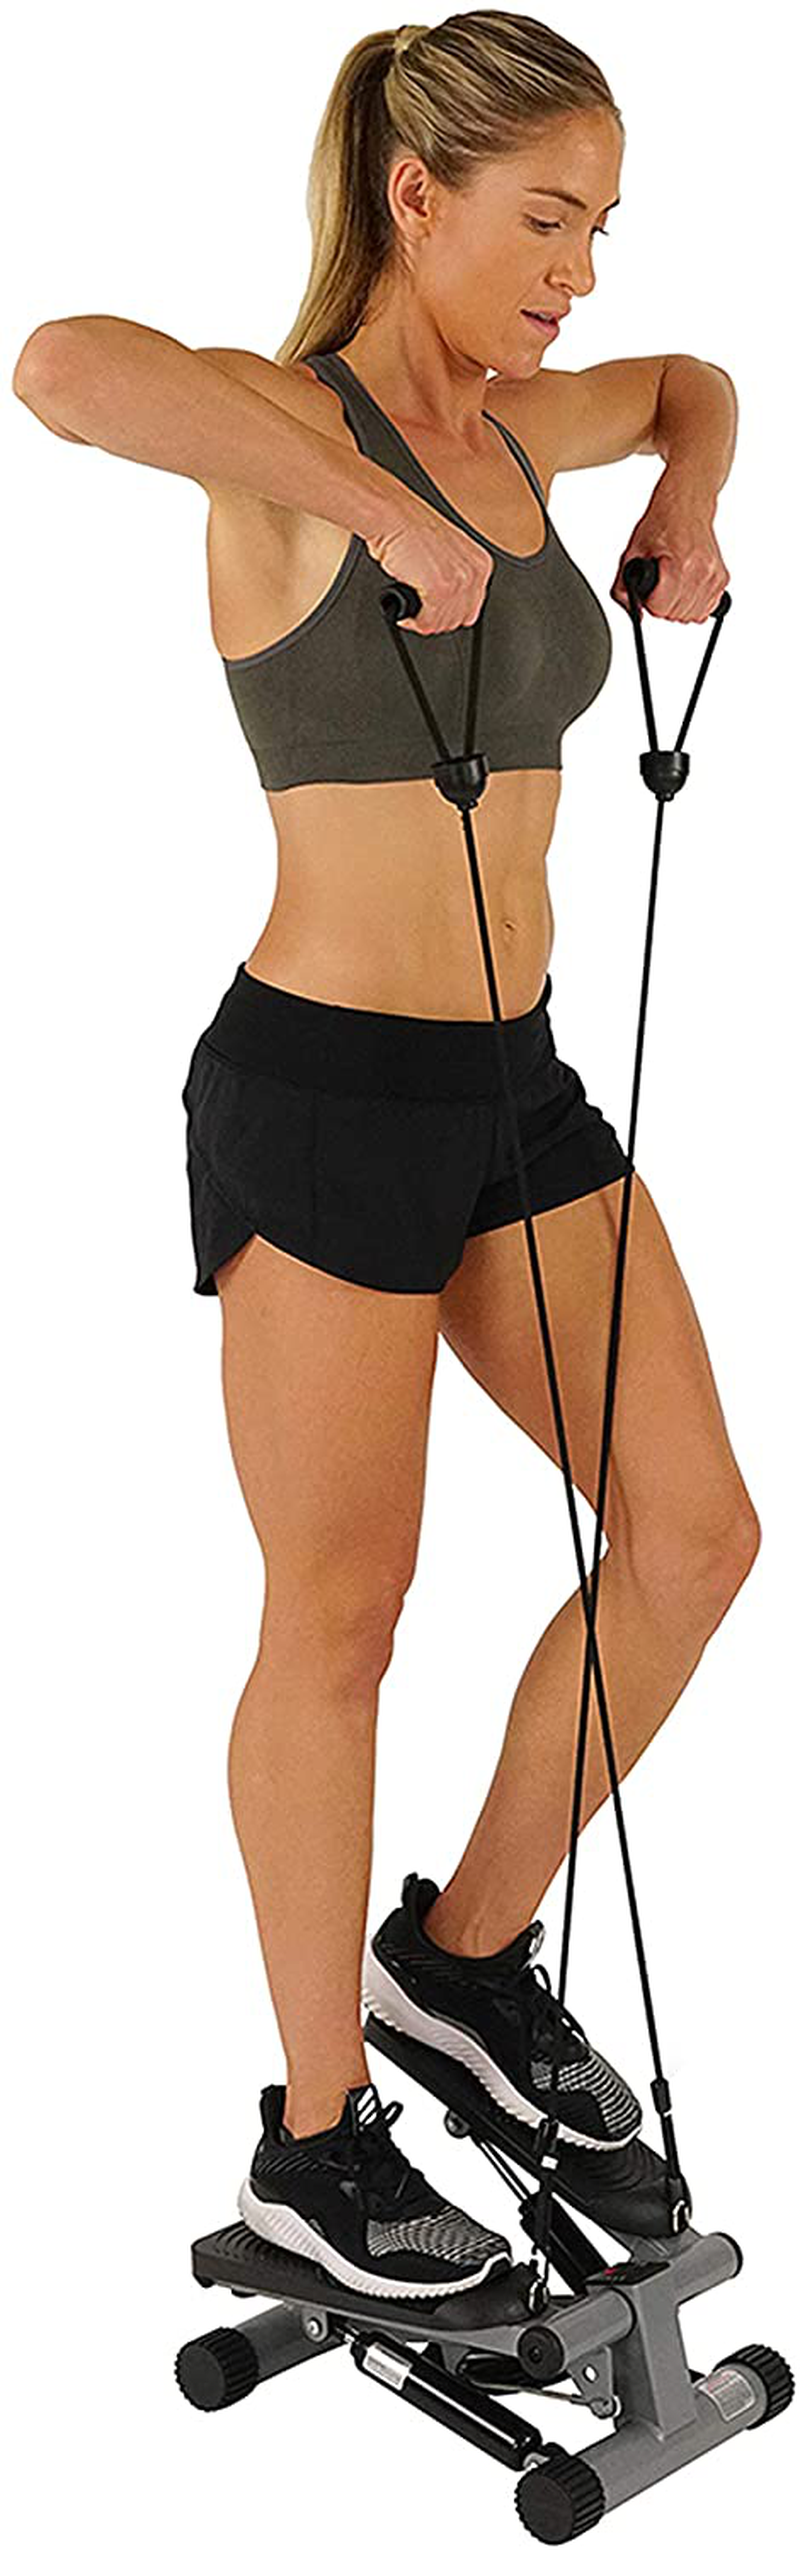 Sunny Health & Fitness Mini Stepper with Resistance Bands  Sunny Health & Fitness Original  